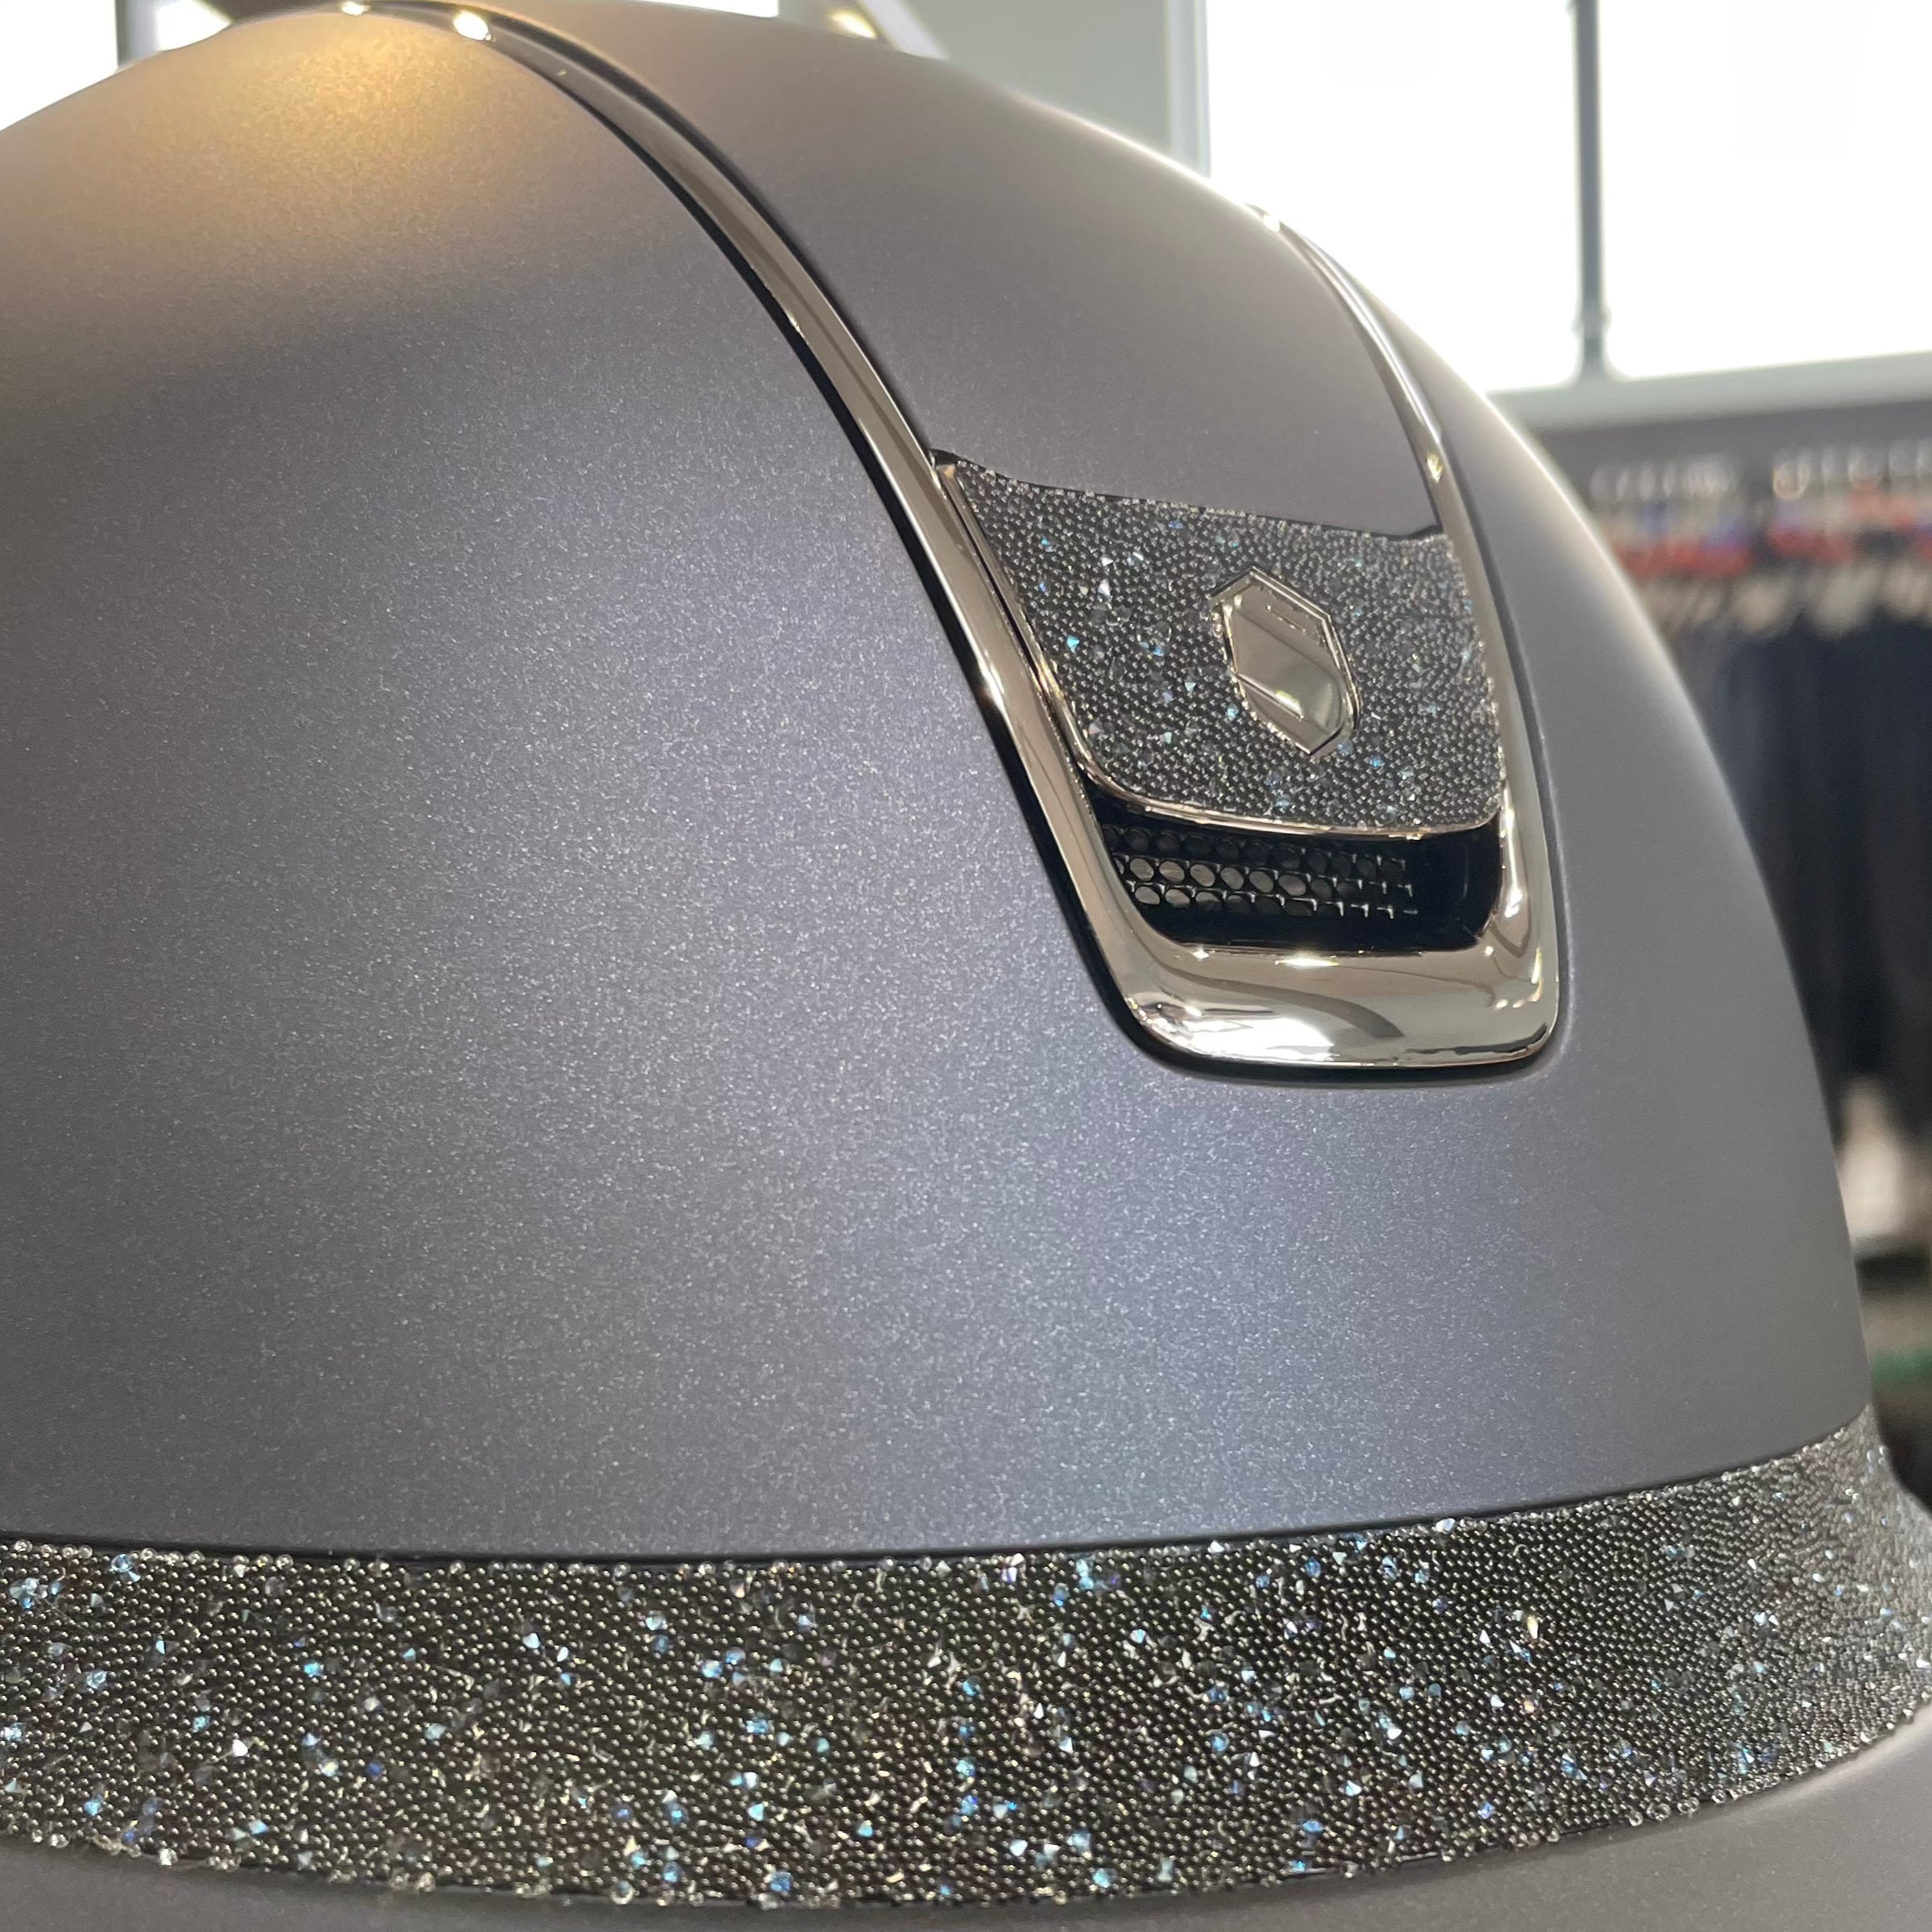 Samshield MissShield 2.0 Blue with swarovski summer night badge and frontal band M- in stock and ready to ship!